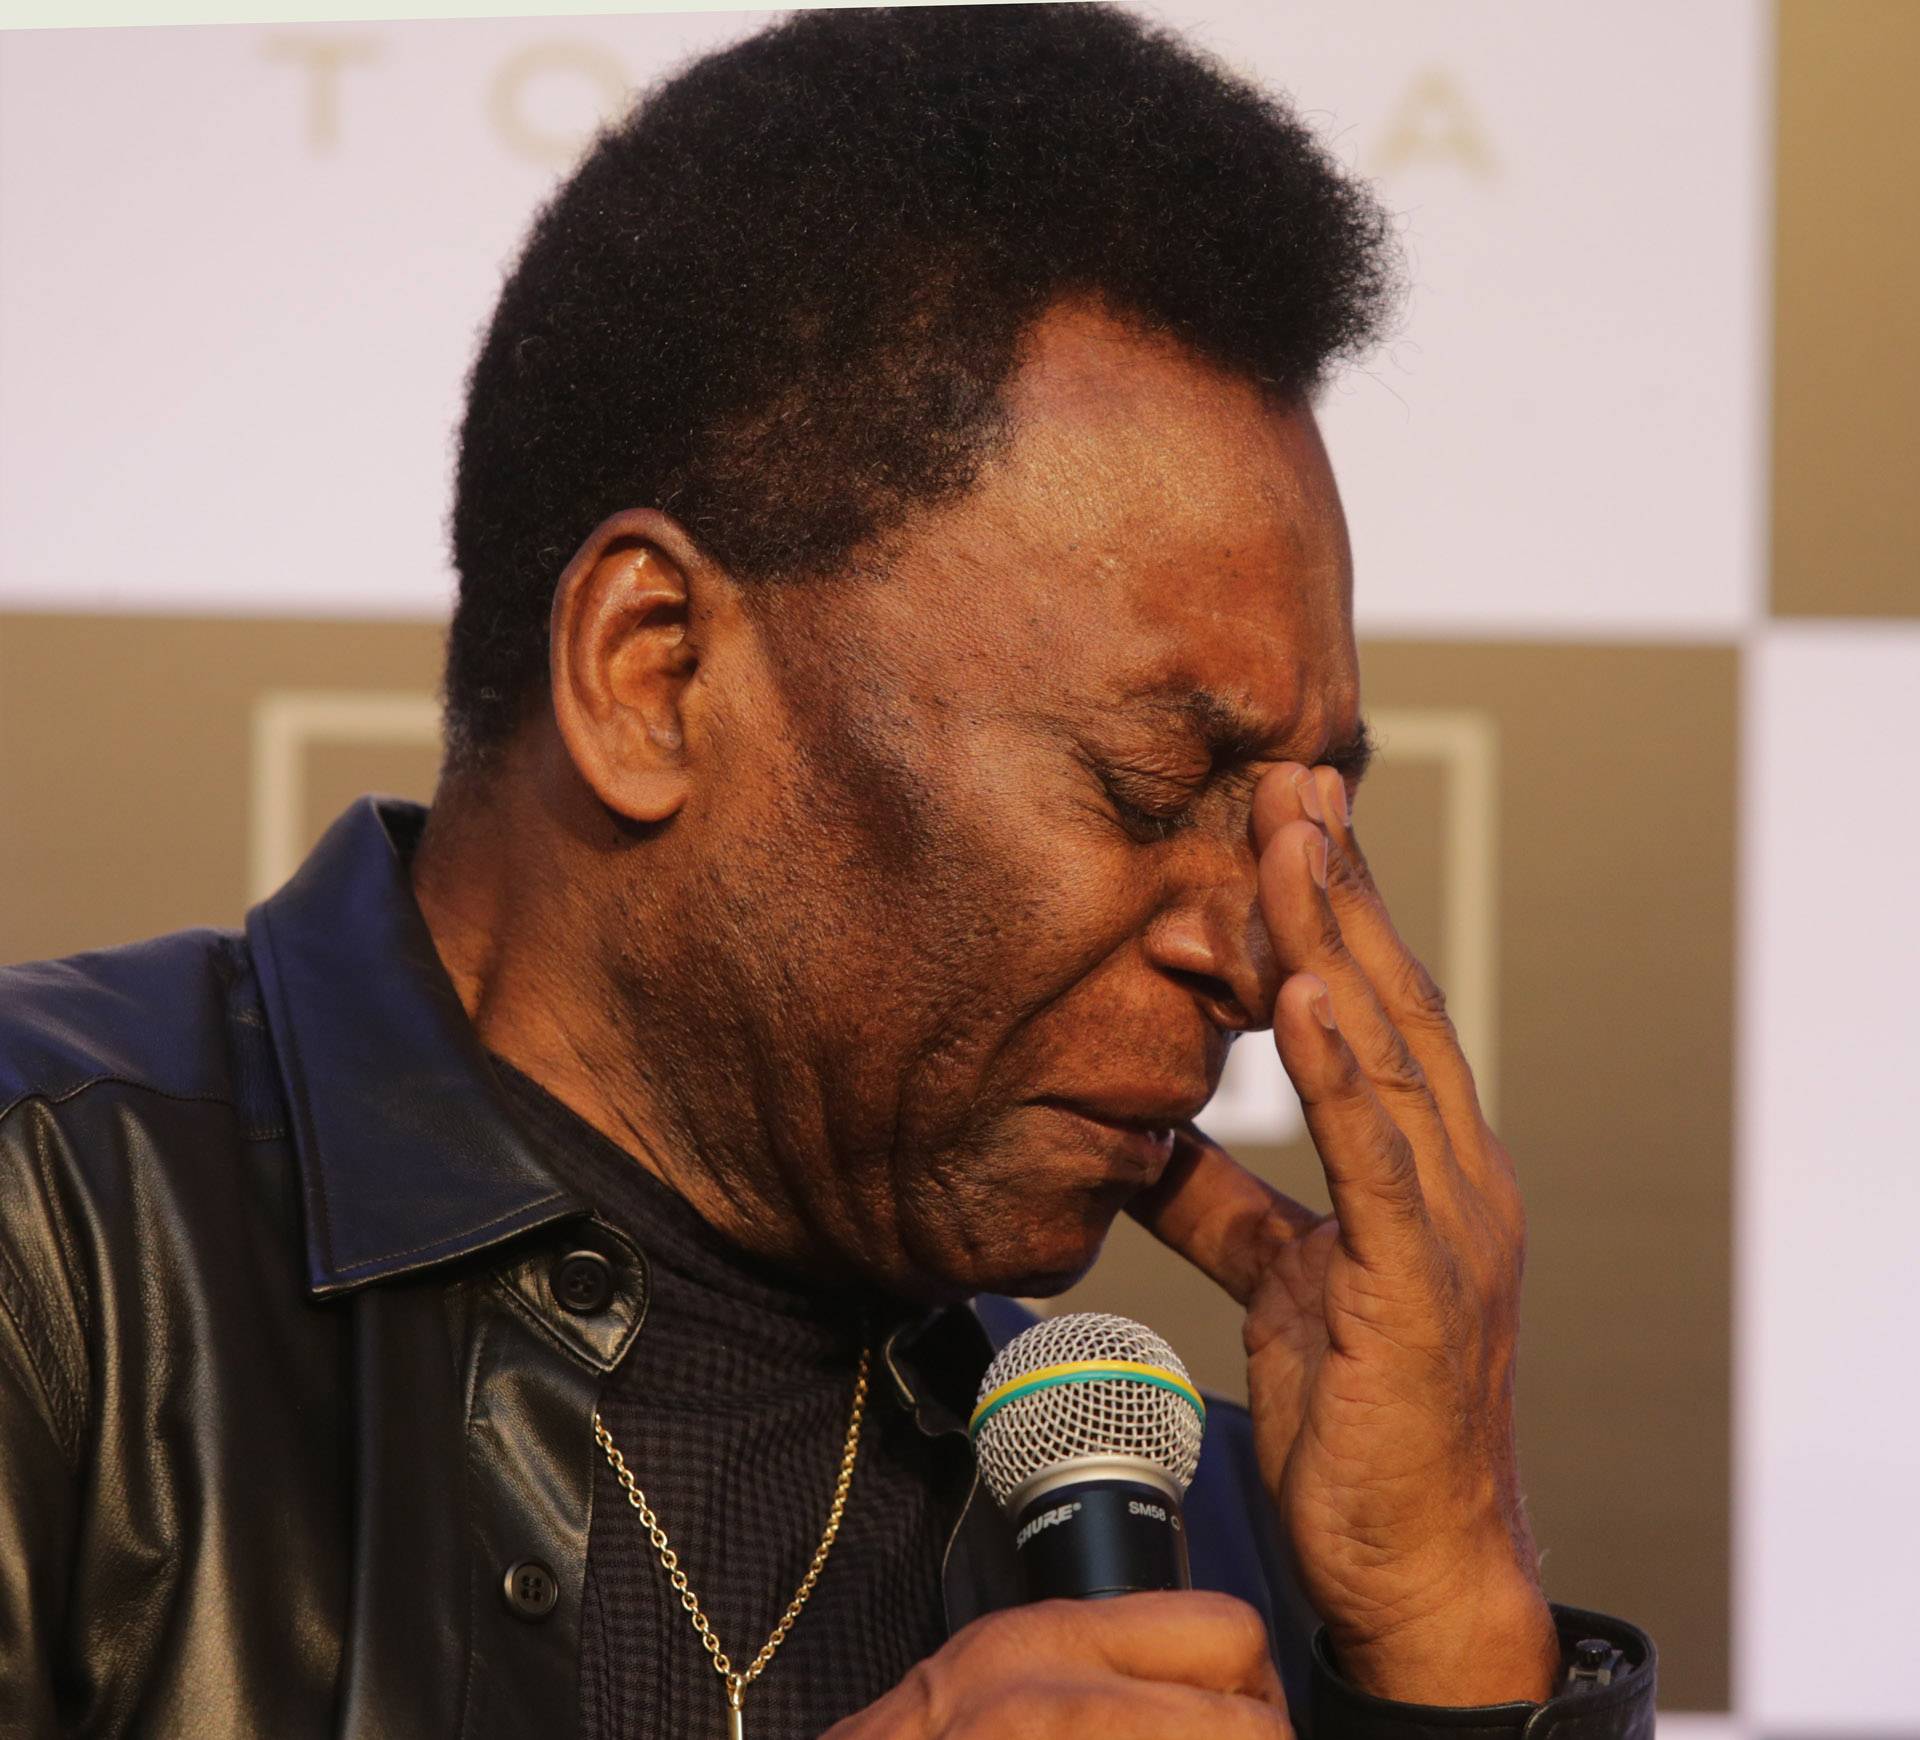 The former Brazilian player Edson Arantes do Nascimento, Pele, is thrilled at the press conference to launch the book "1283".